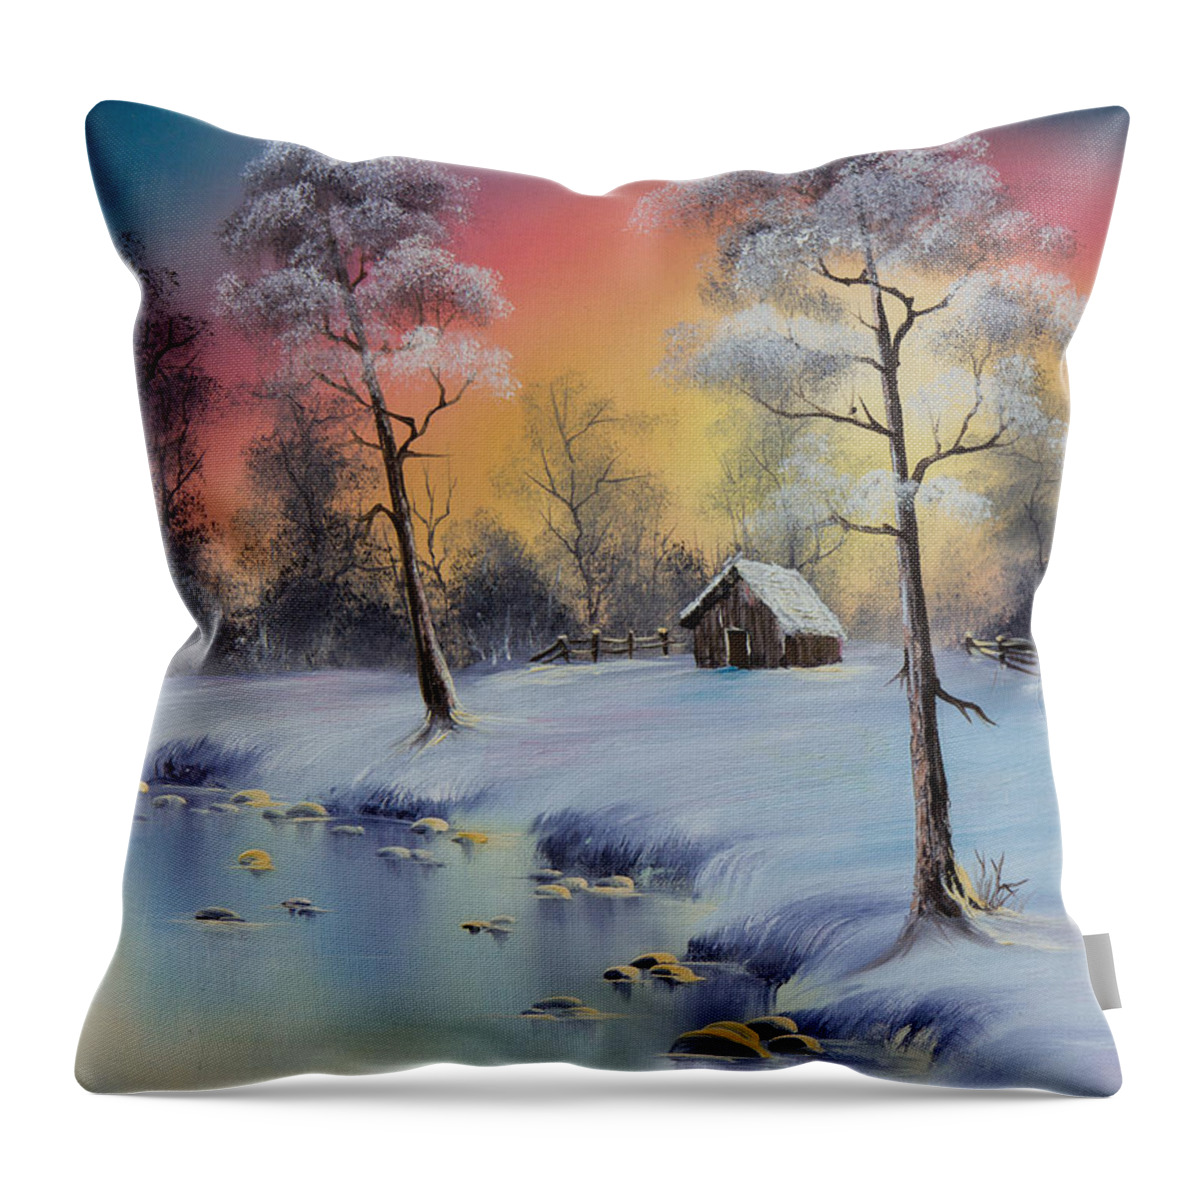 Landscape Throw Pillow featuring the painting Winter's Grace by Chris Steele